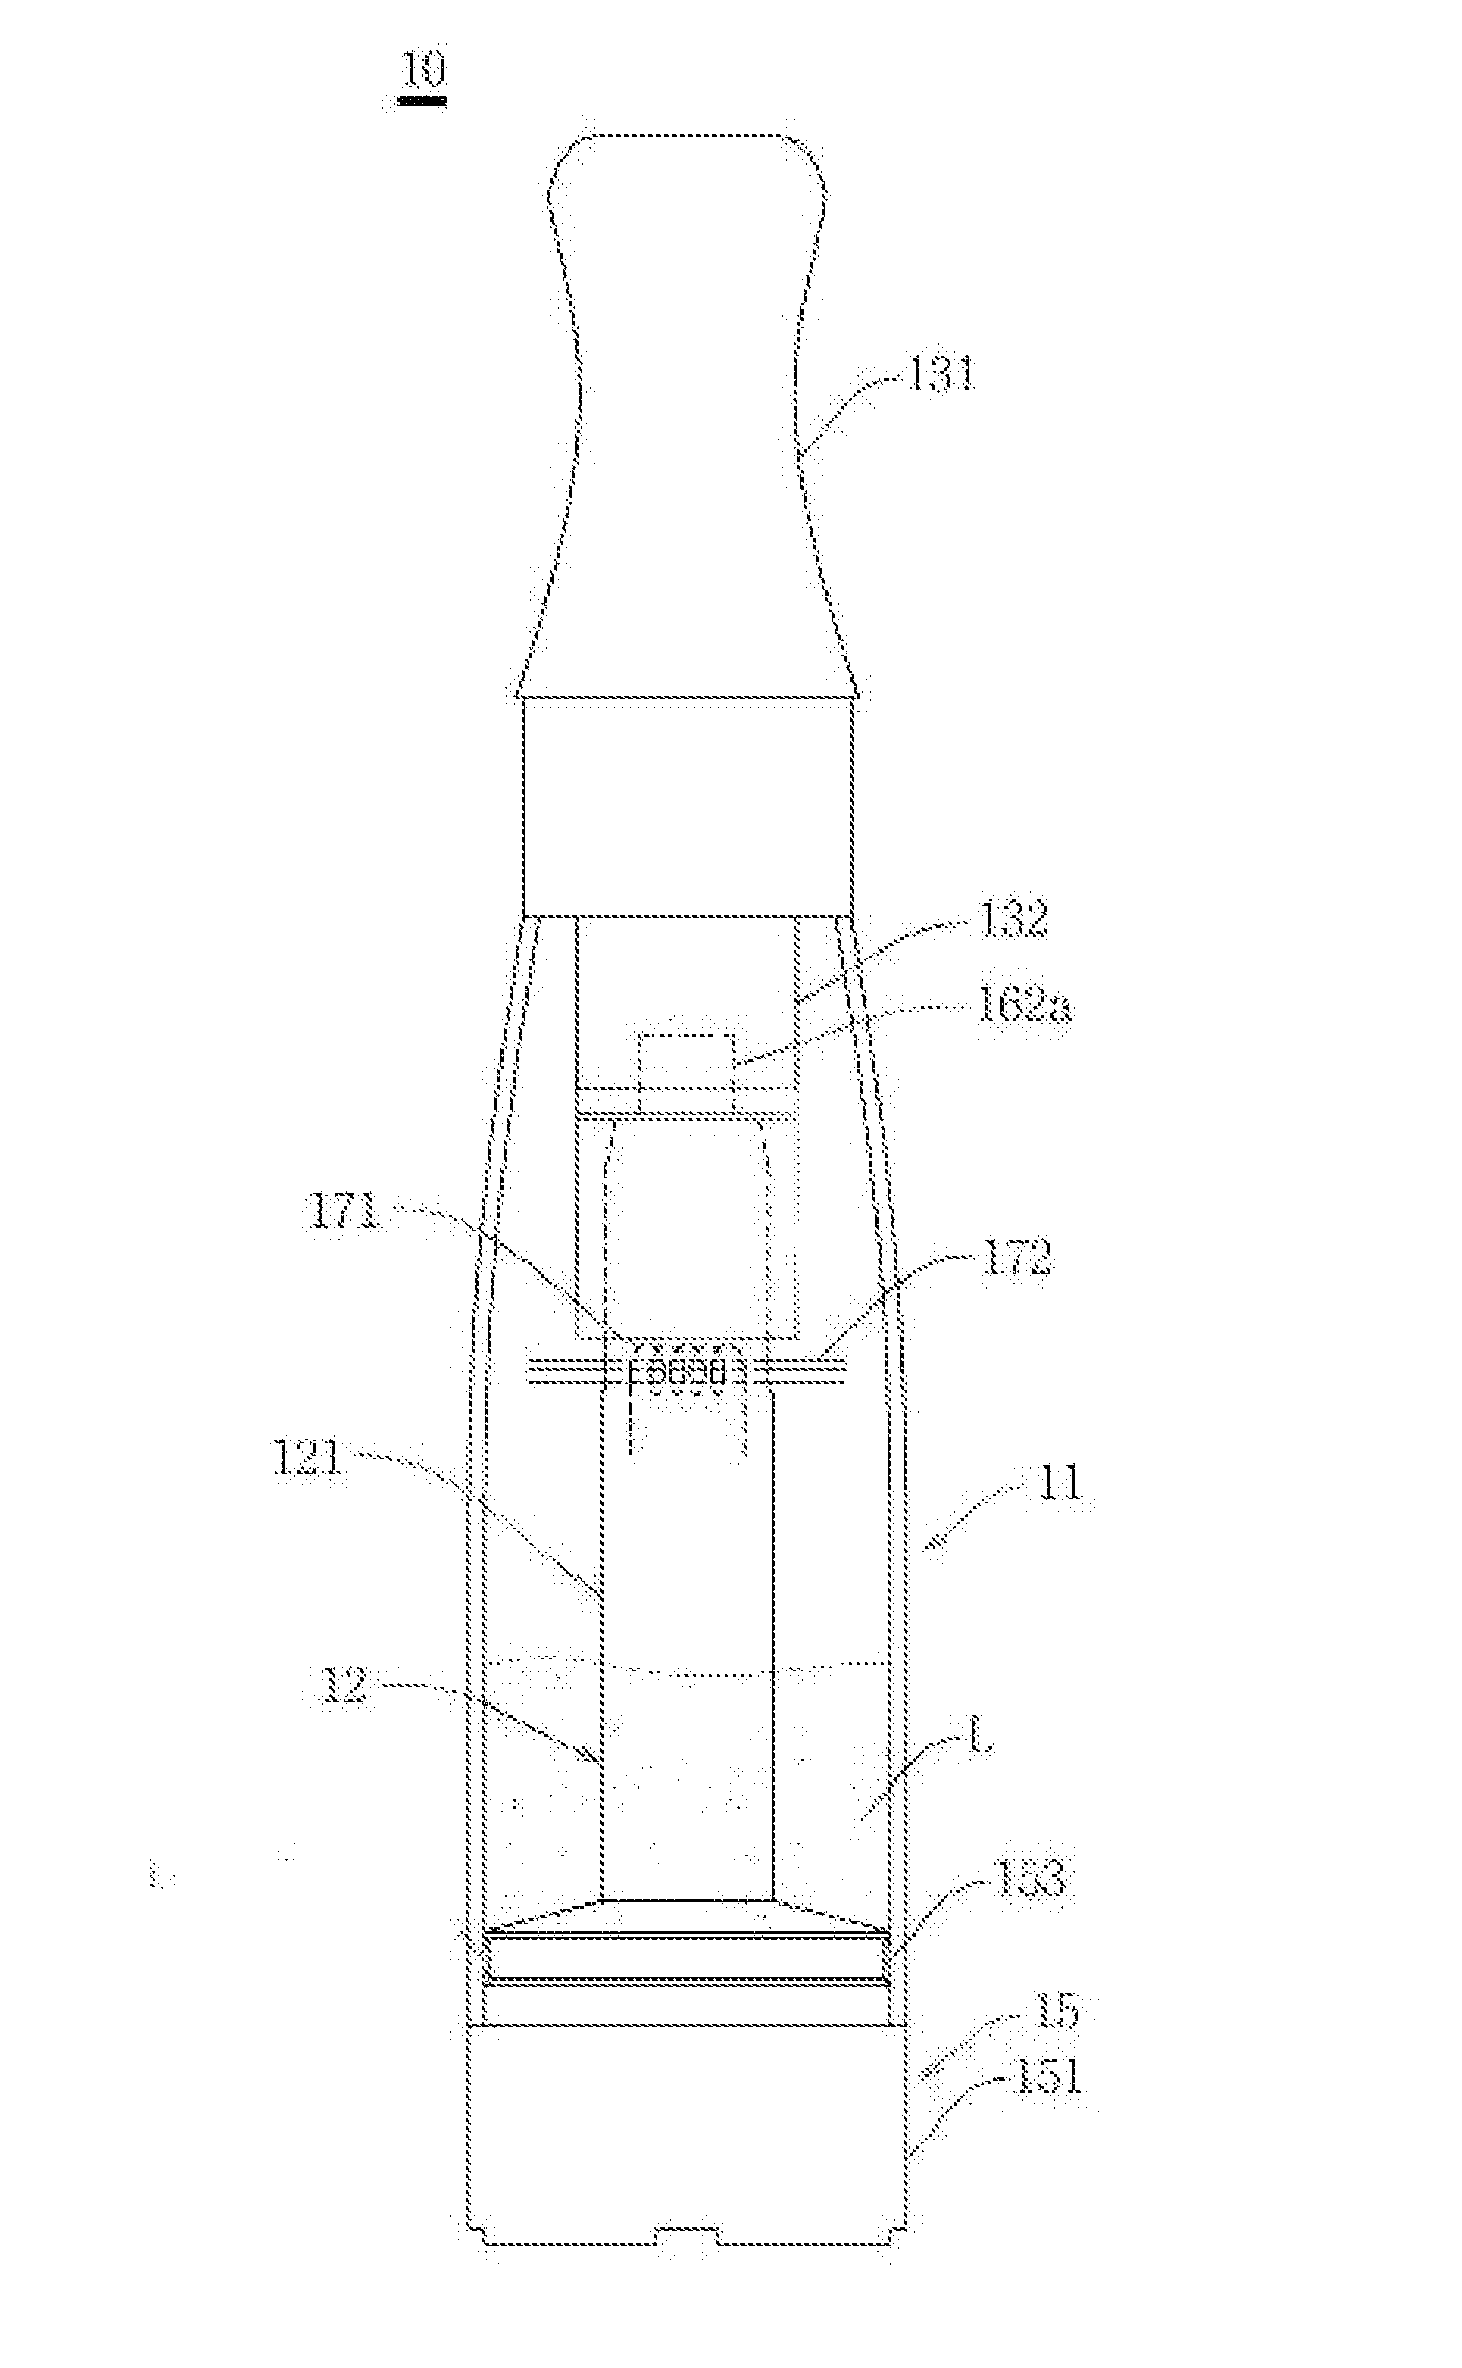 Cartridge of Electric Cigarette For Preventing Leakage